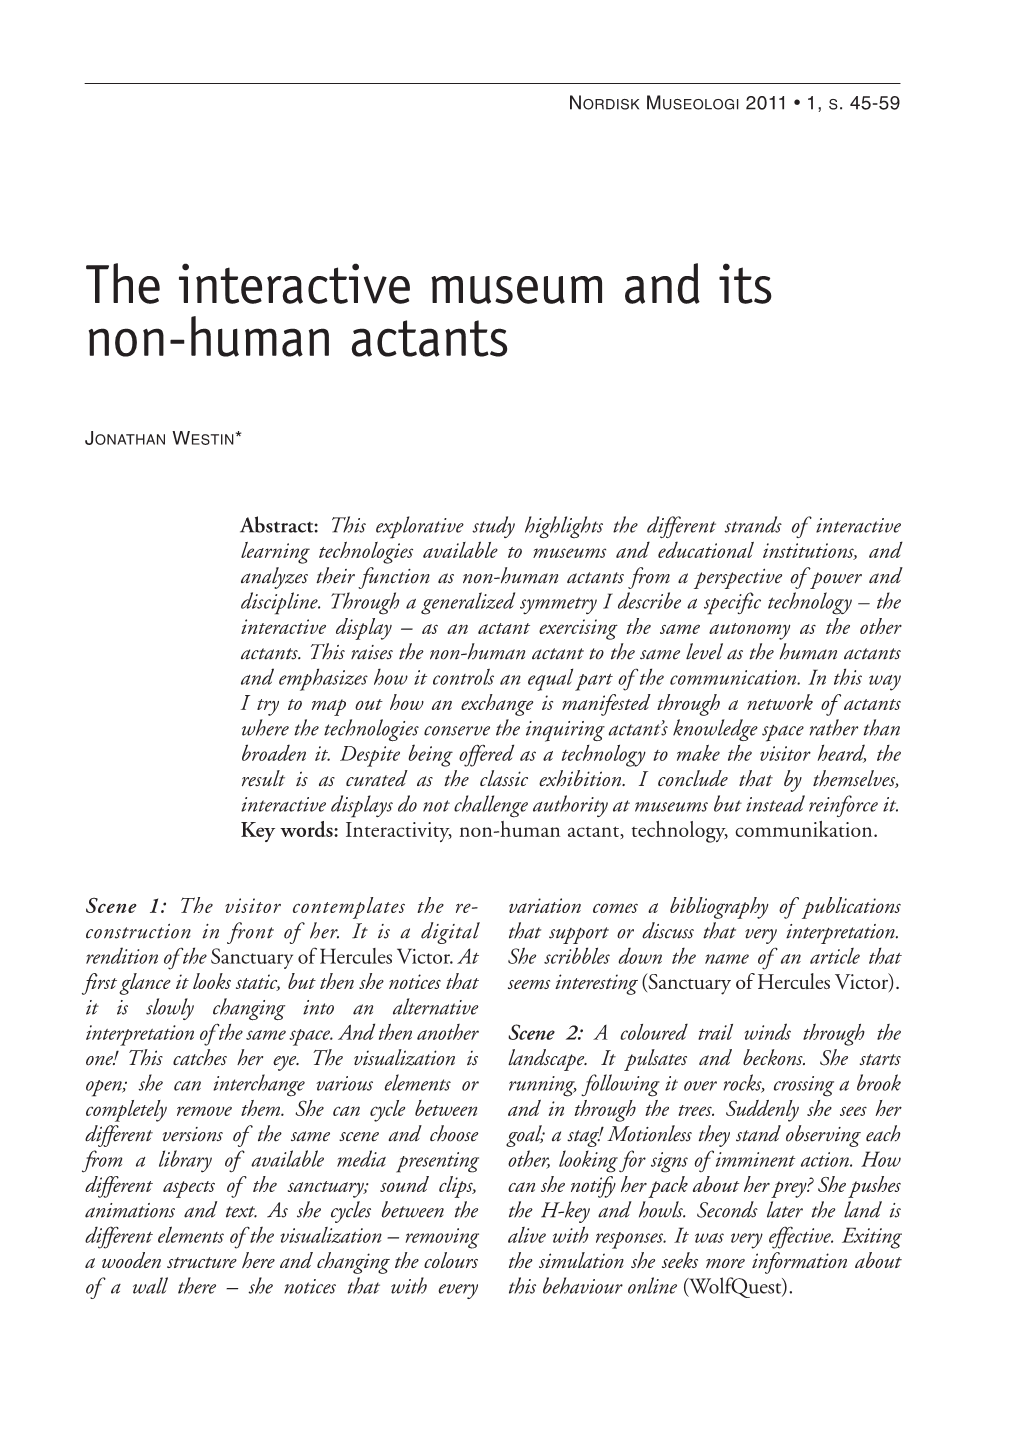 The Interactive Museum and Its Non-Human Actants